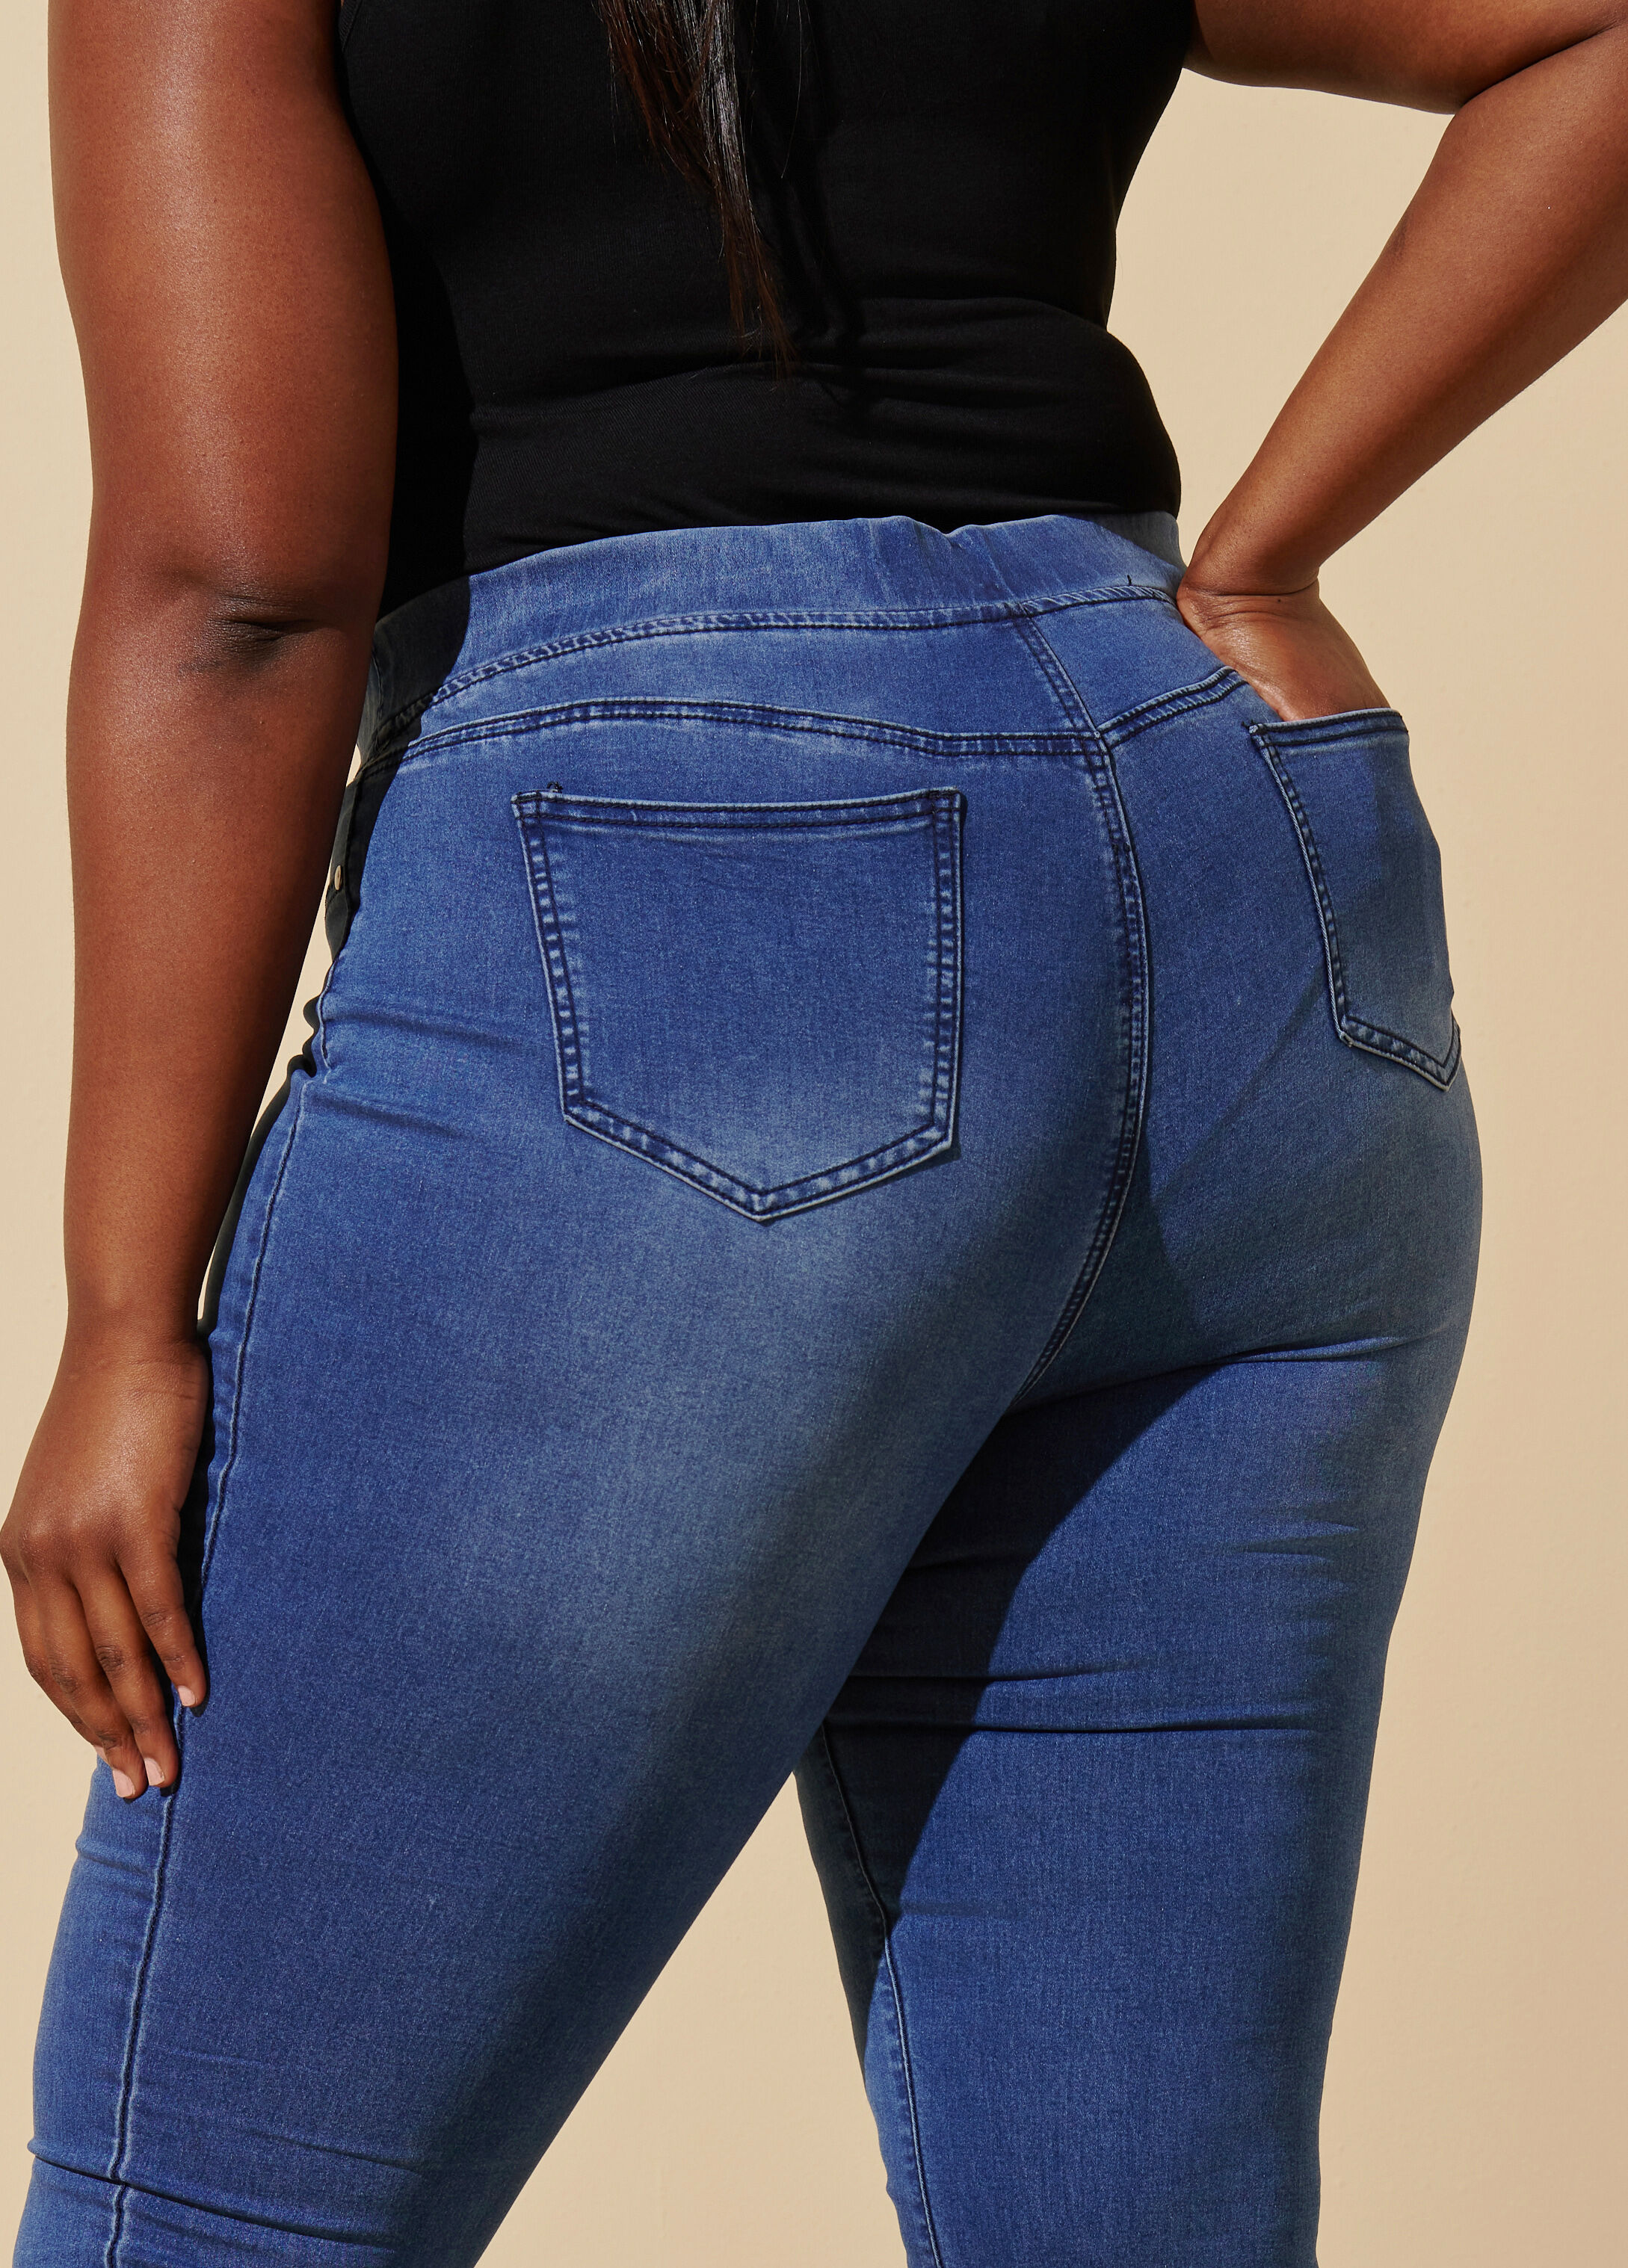 What is the difference between high-rise and high-waist jeans? - Quora